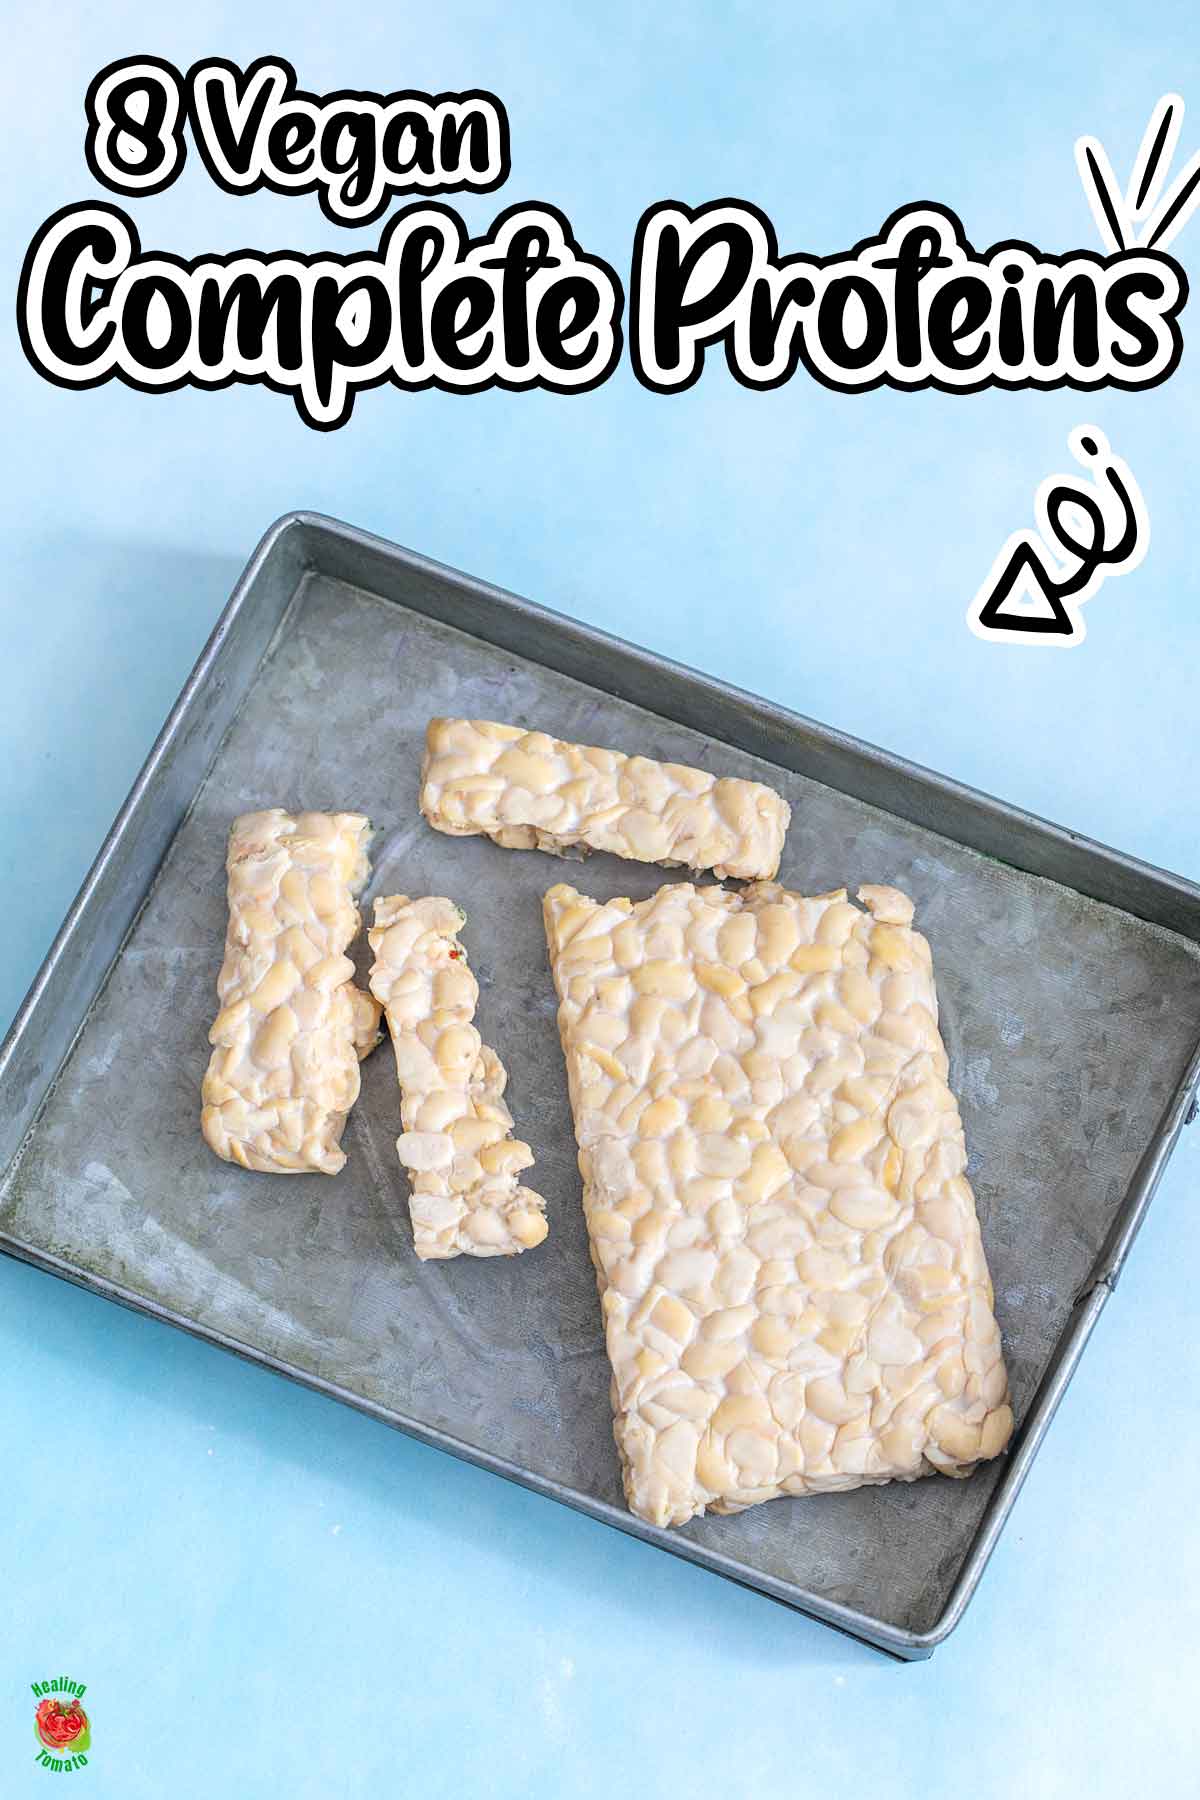 Top view of pieces of tempeh put in a grey tray with the title "8 vegan complete protein" 